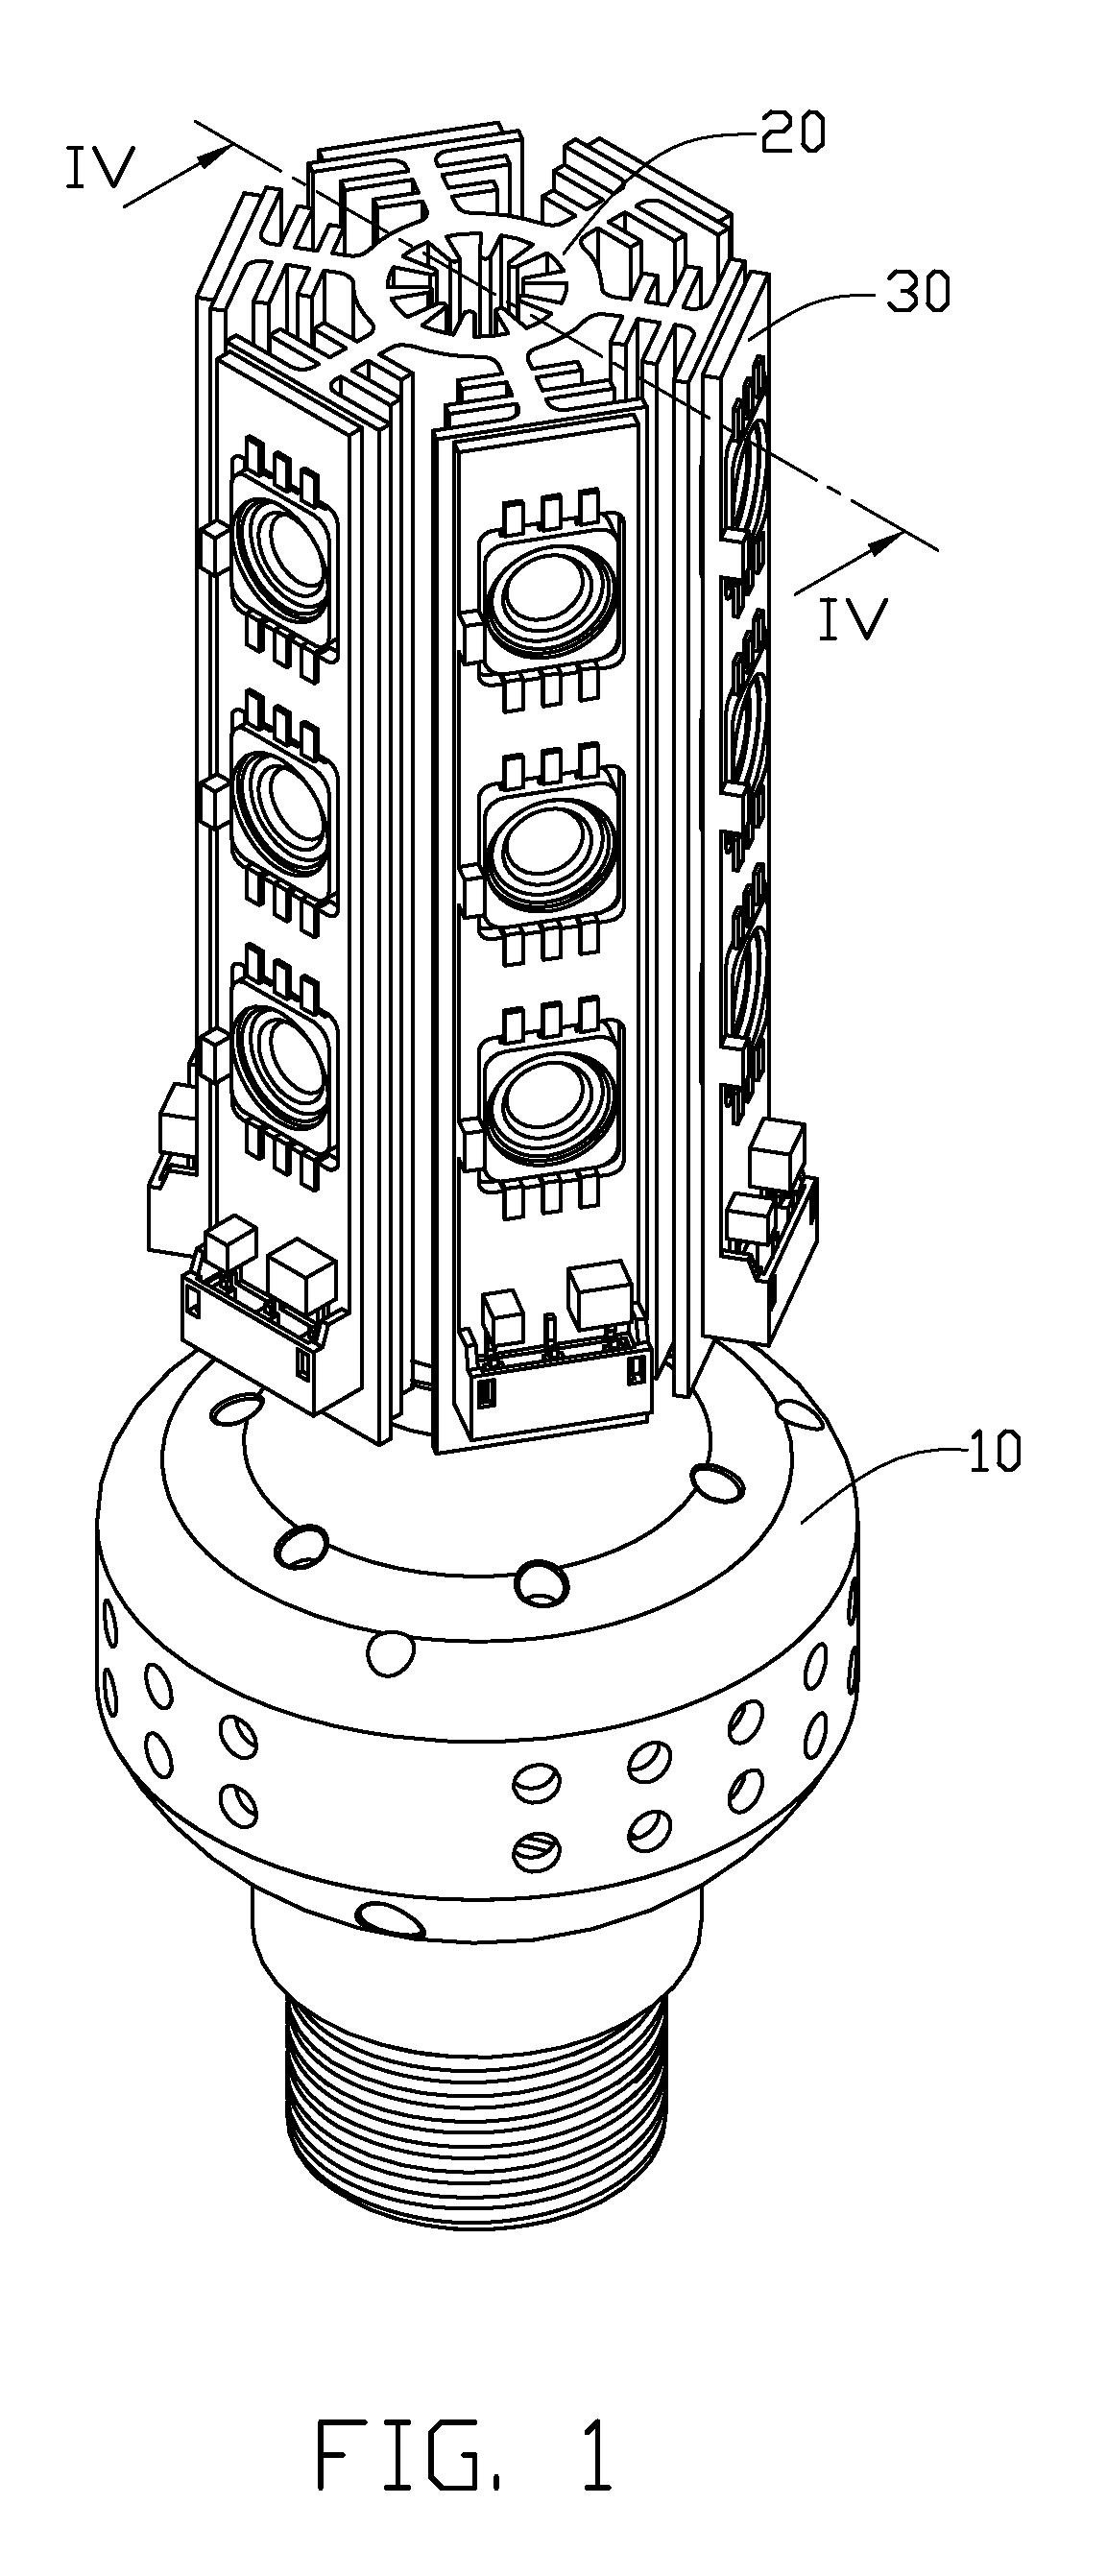 LED lamp having heat dissipation structure